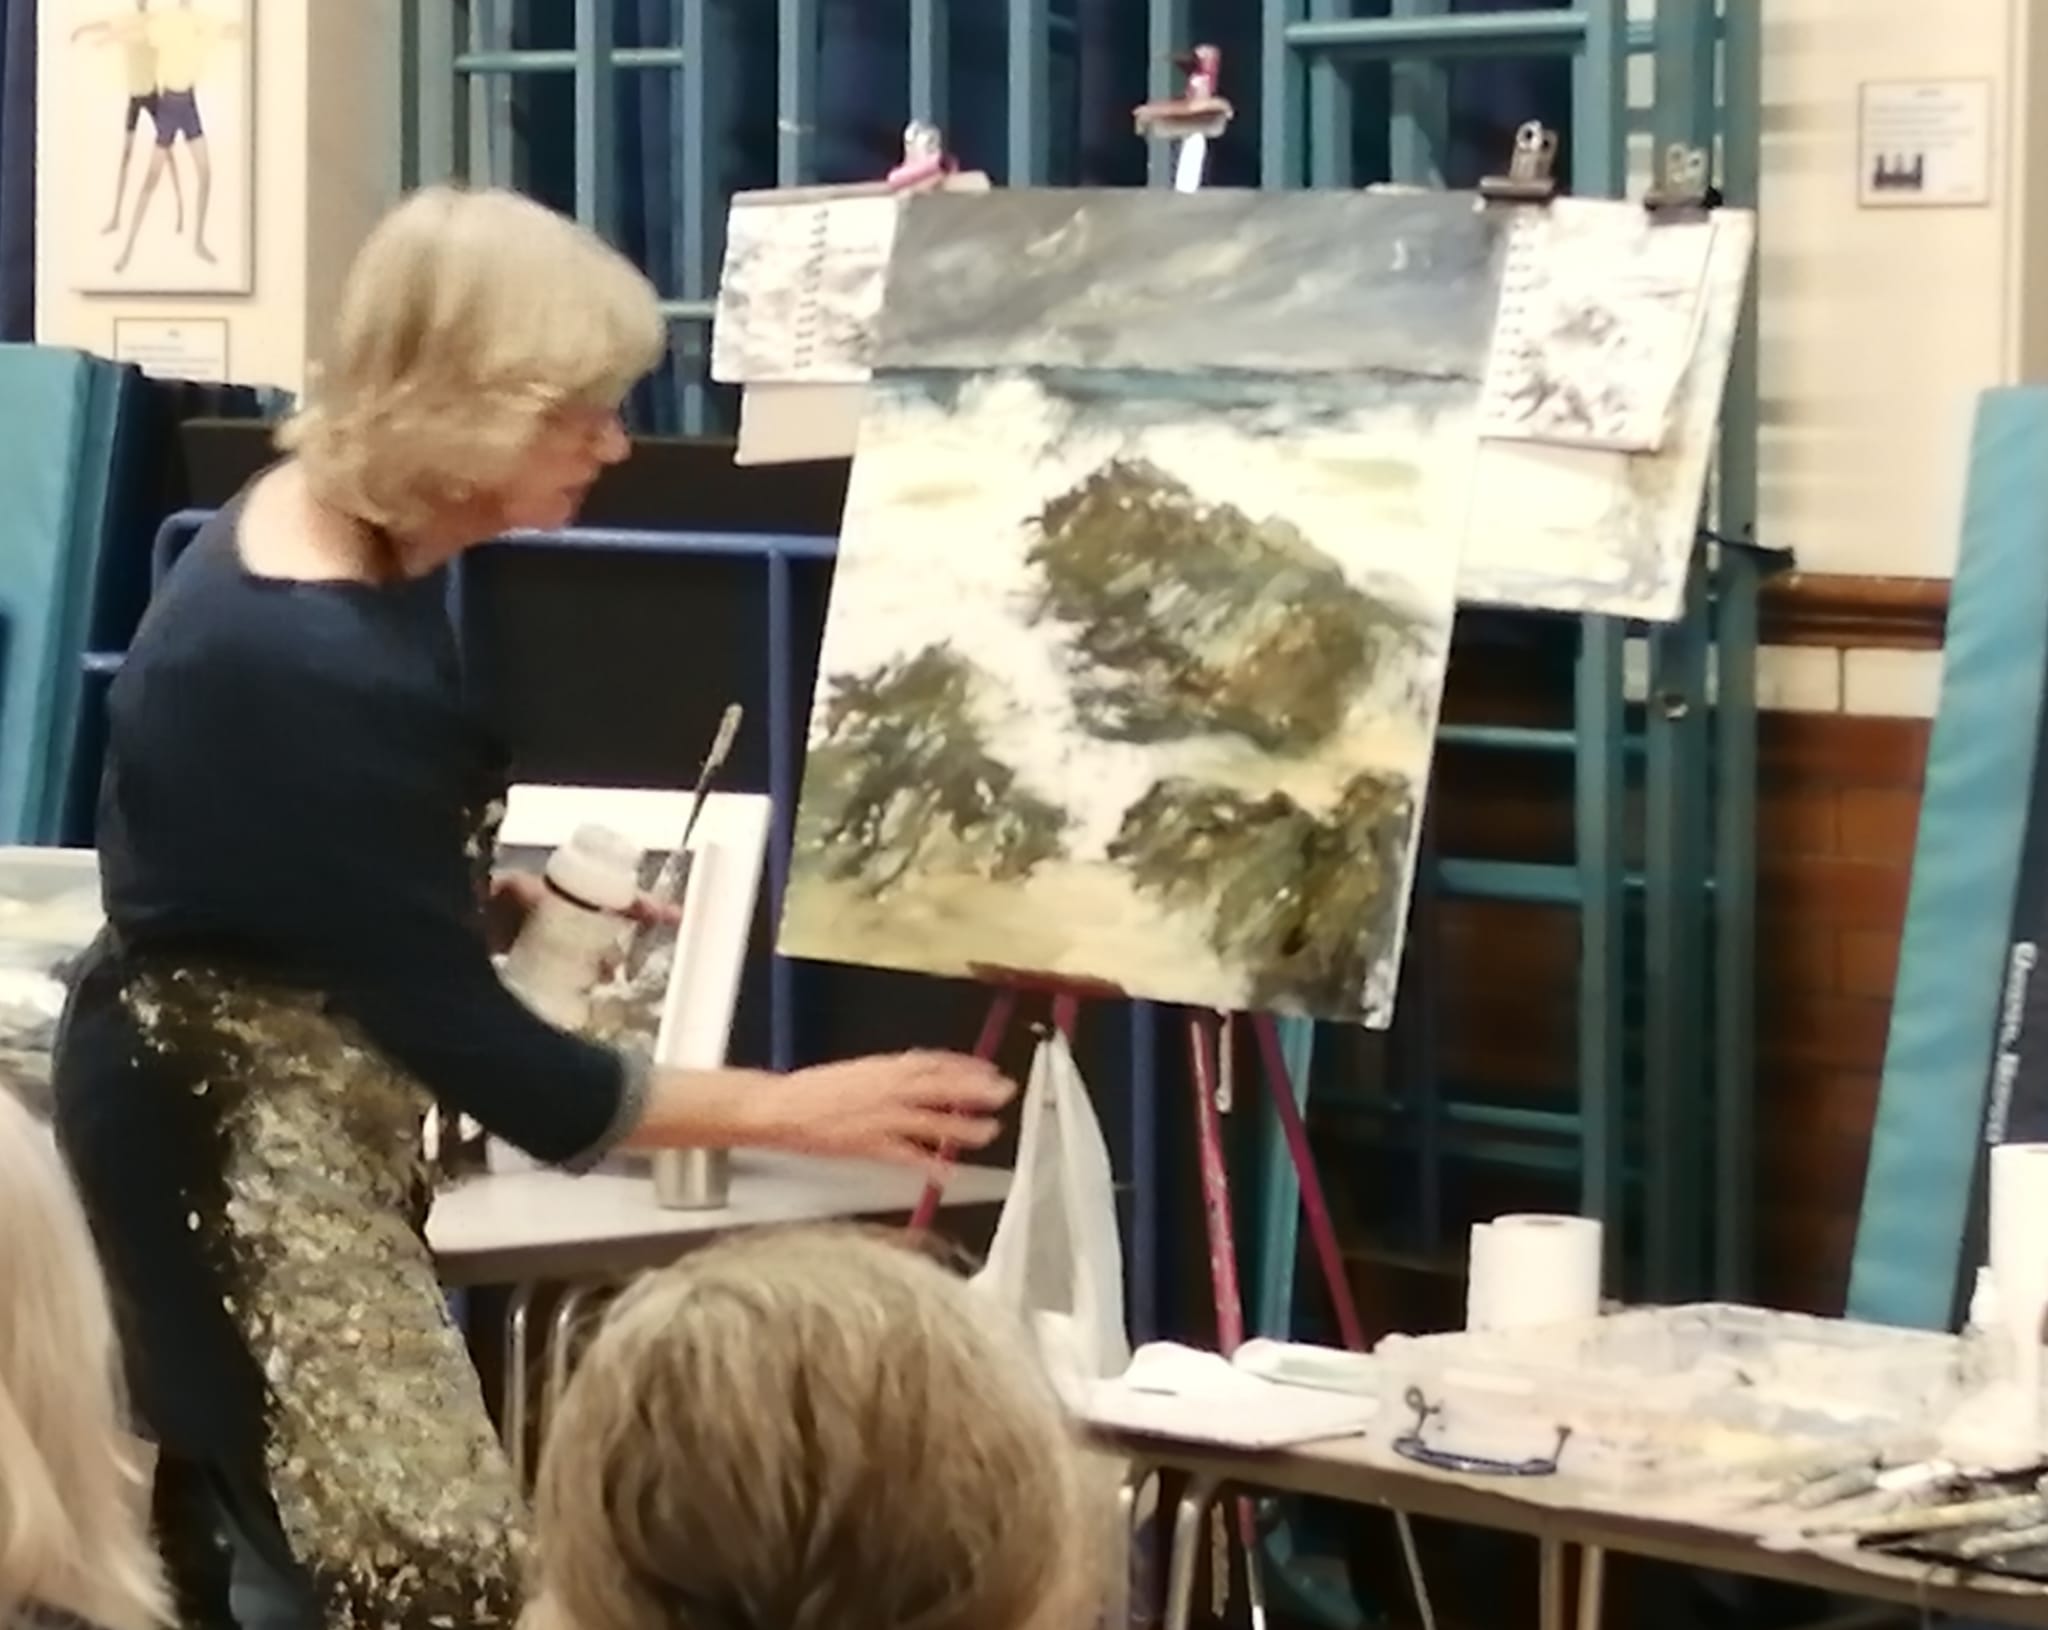 A person talking to a group with paintings in the background